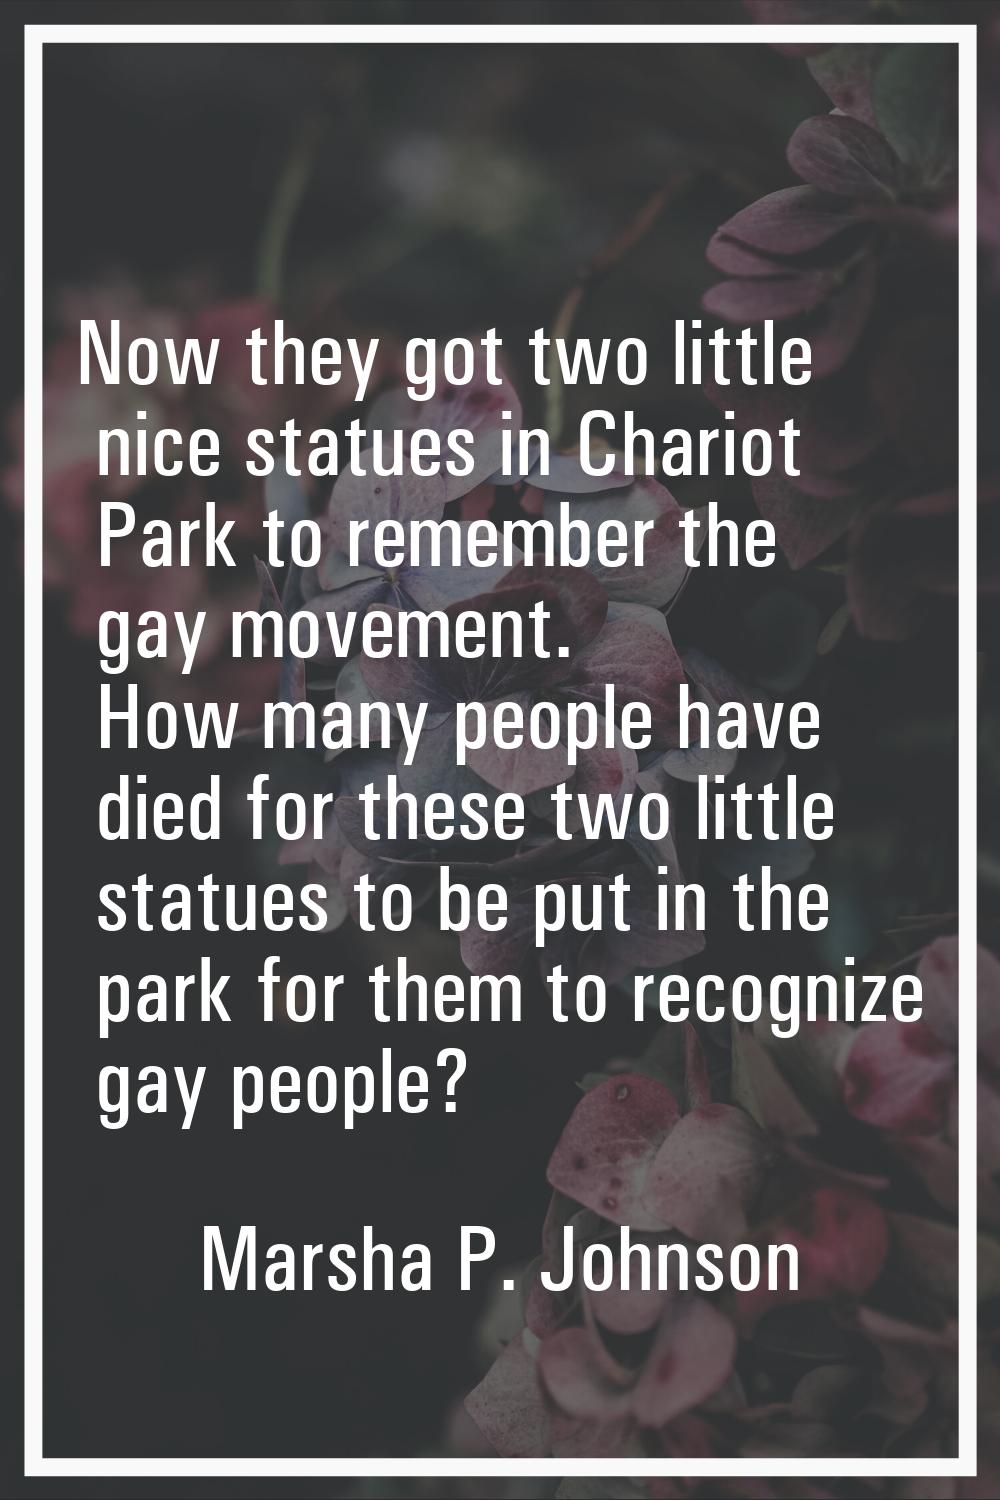 Now they got two little nice statues in Chariot Park to remember the gay movement. How many people 